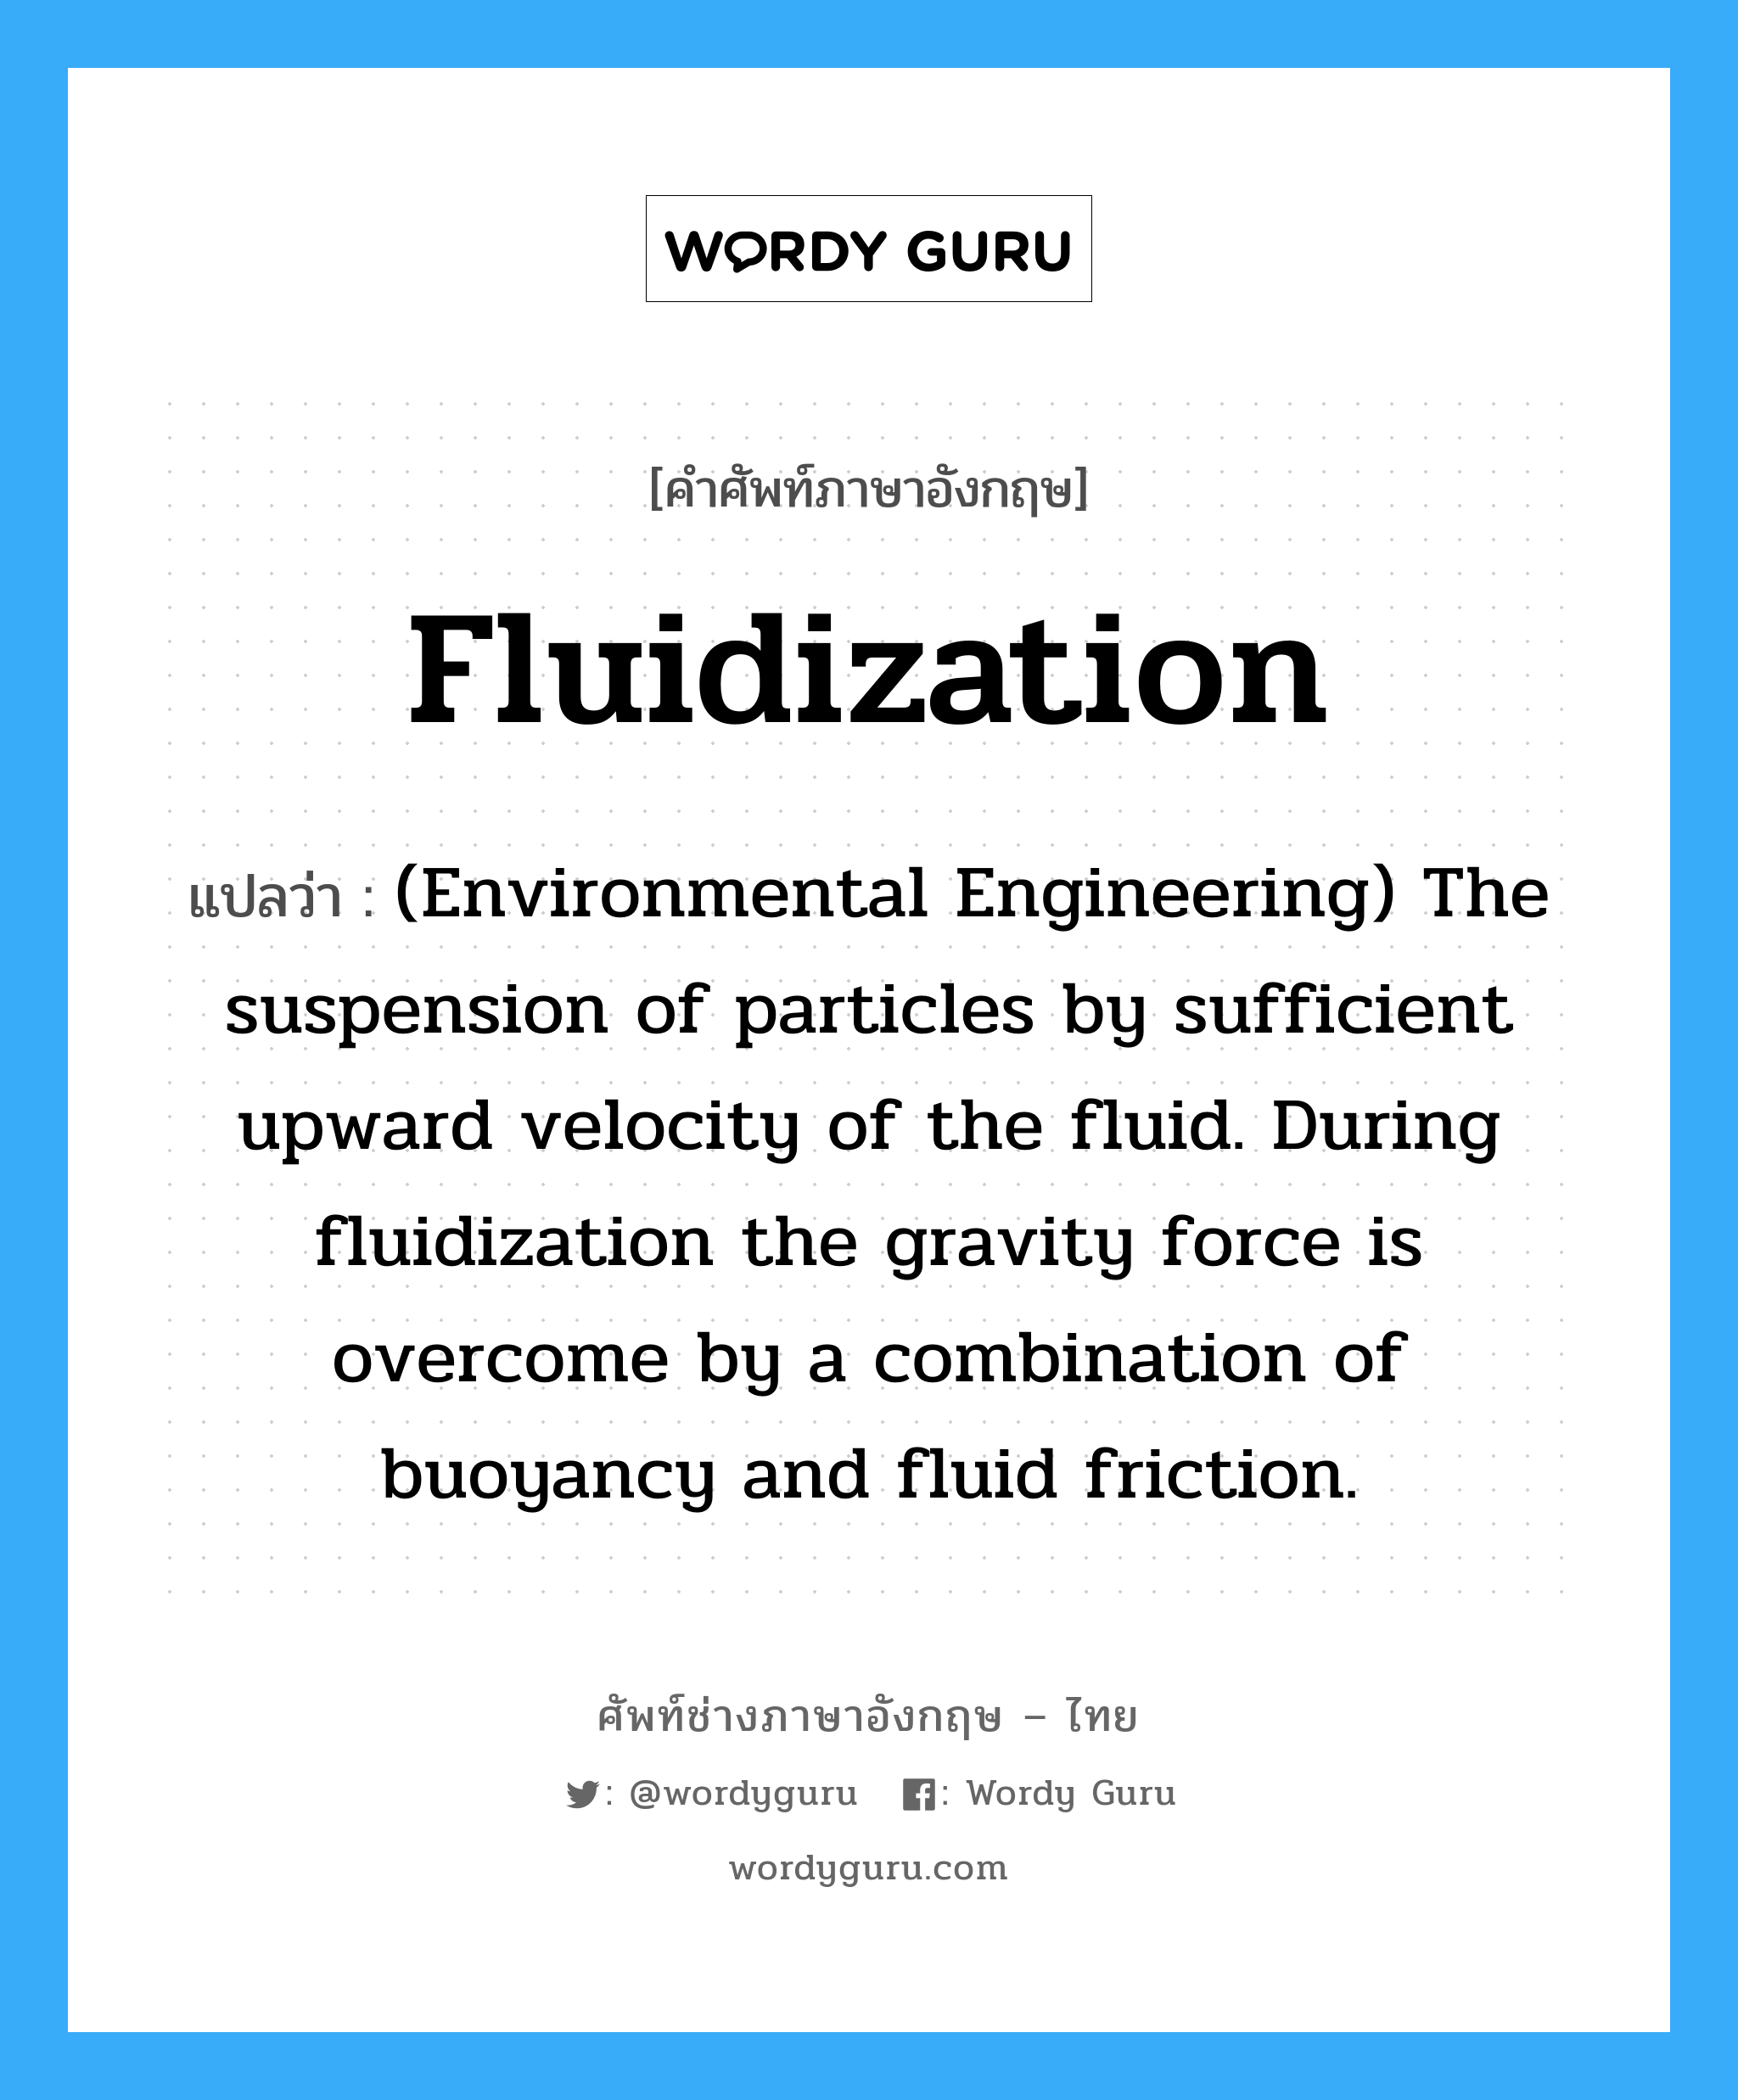 Fluidization แปลว่า?, คำศัพท์ช่างภาษาอังกฤษ - ไทย Fluidization คำศัพท์ภาษาอังกฤษ Fluidization แปลว่า (Environmental Engineering) The suspension of particles by sufficient upward velocity of the fluid. During fluidization the gravity force is overcome by a combination of buoyancy and fluid friction.